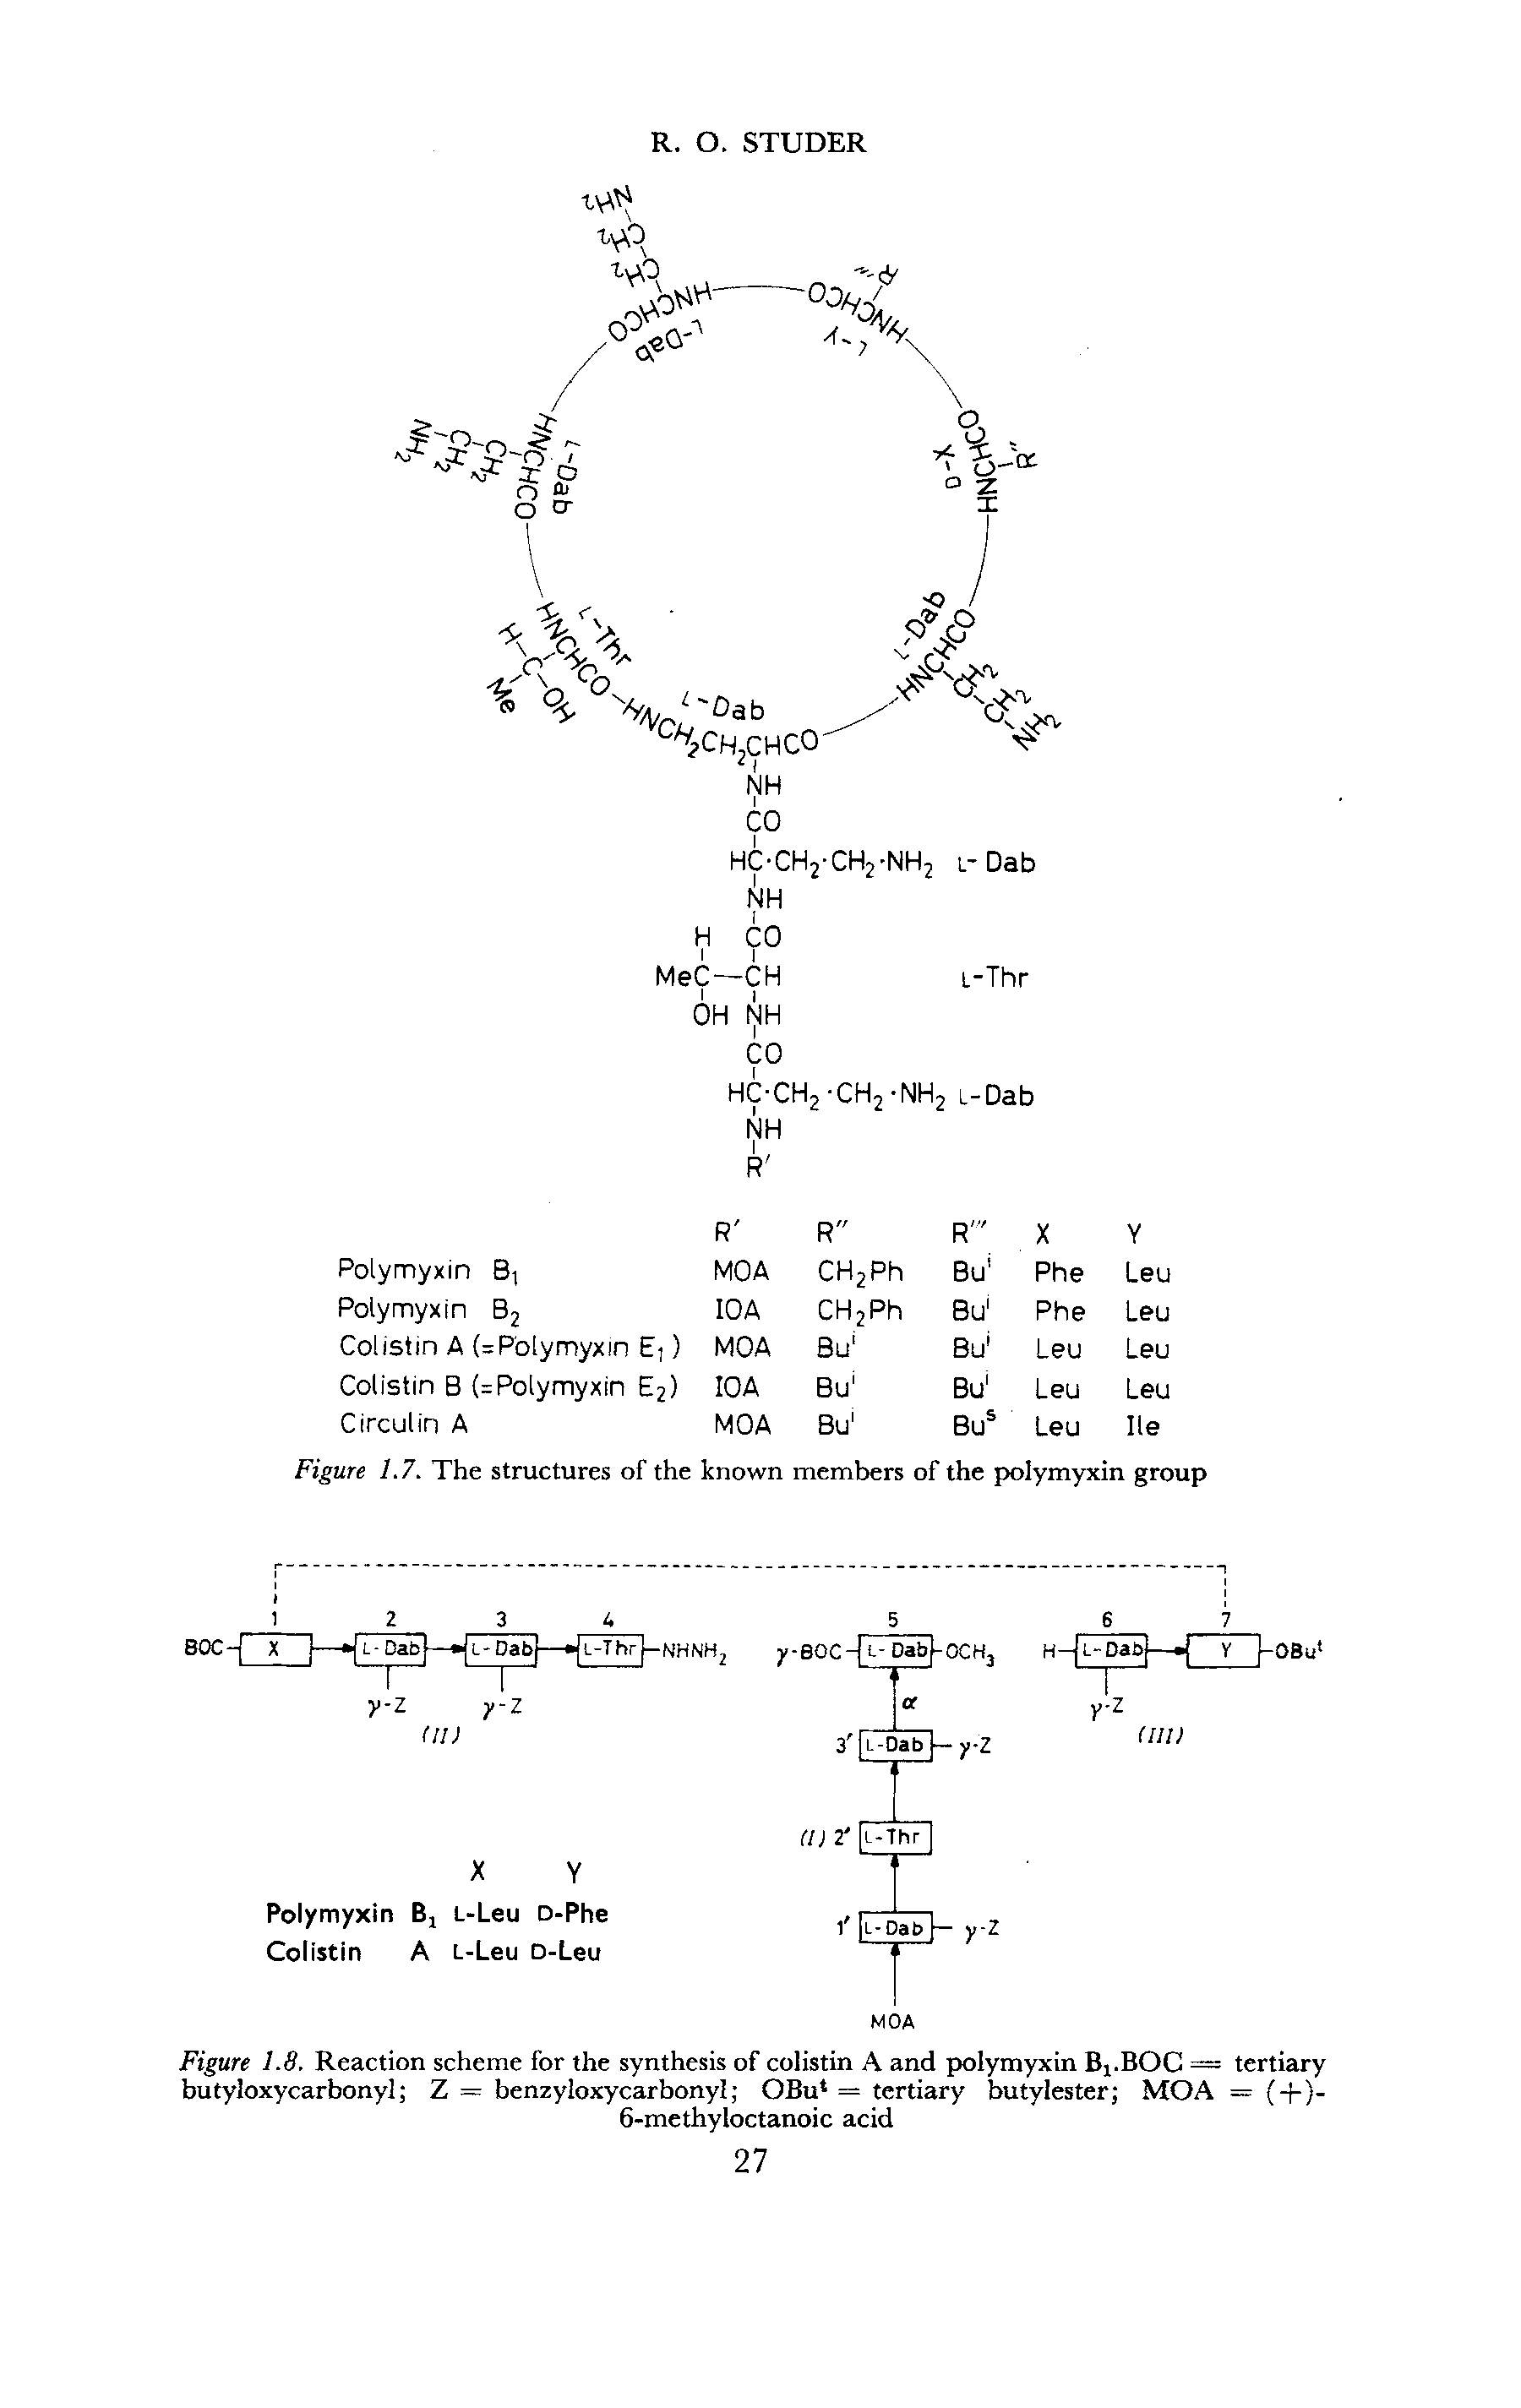 Figure 1.7. The structures of the known members of the polymyxin group...